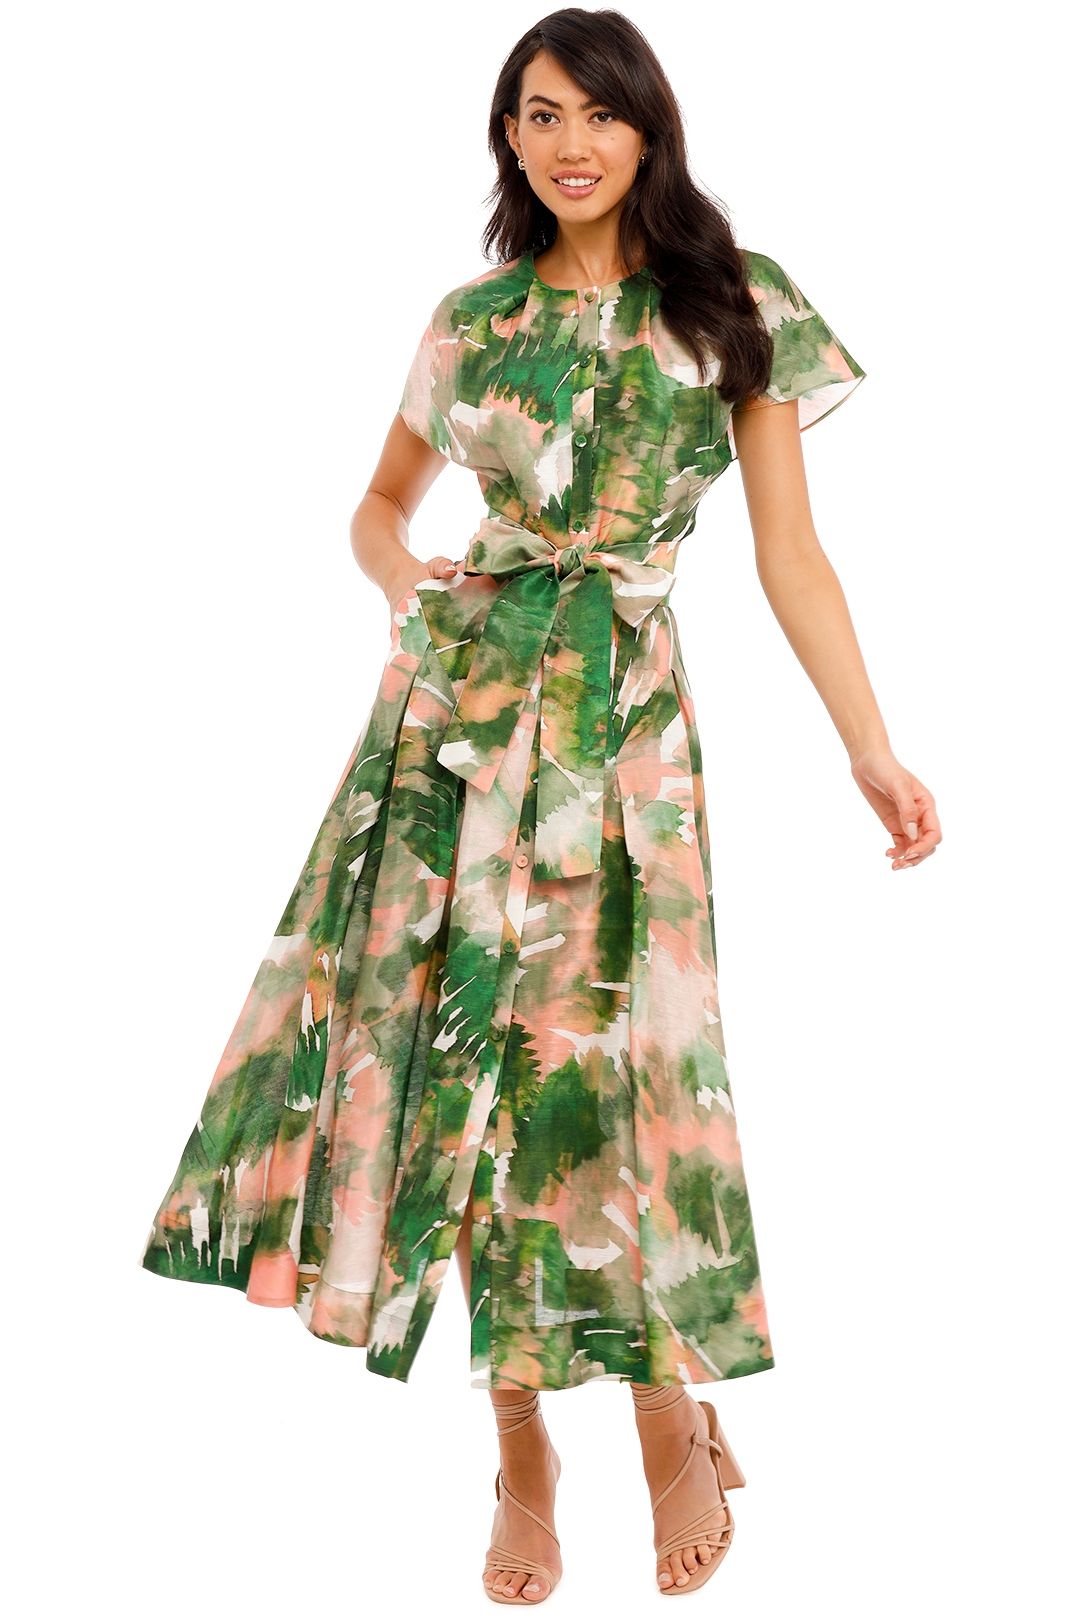 Aquarelle Dress Ginger and Smart Abstract Print